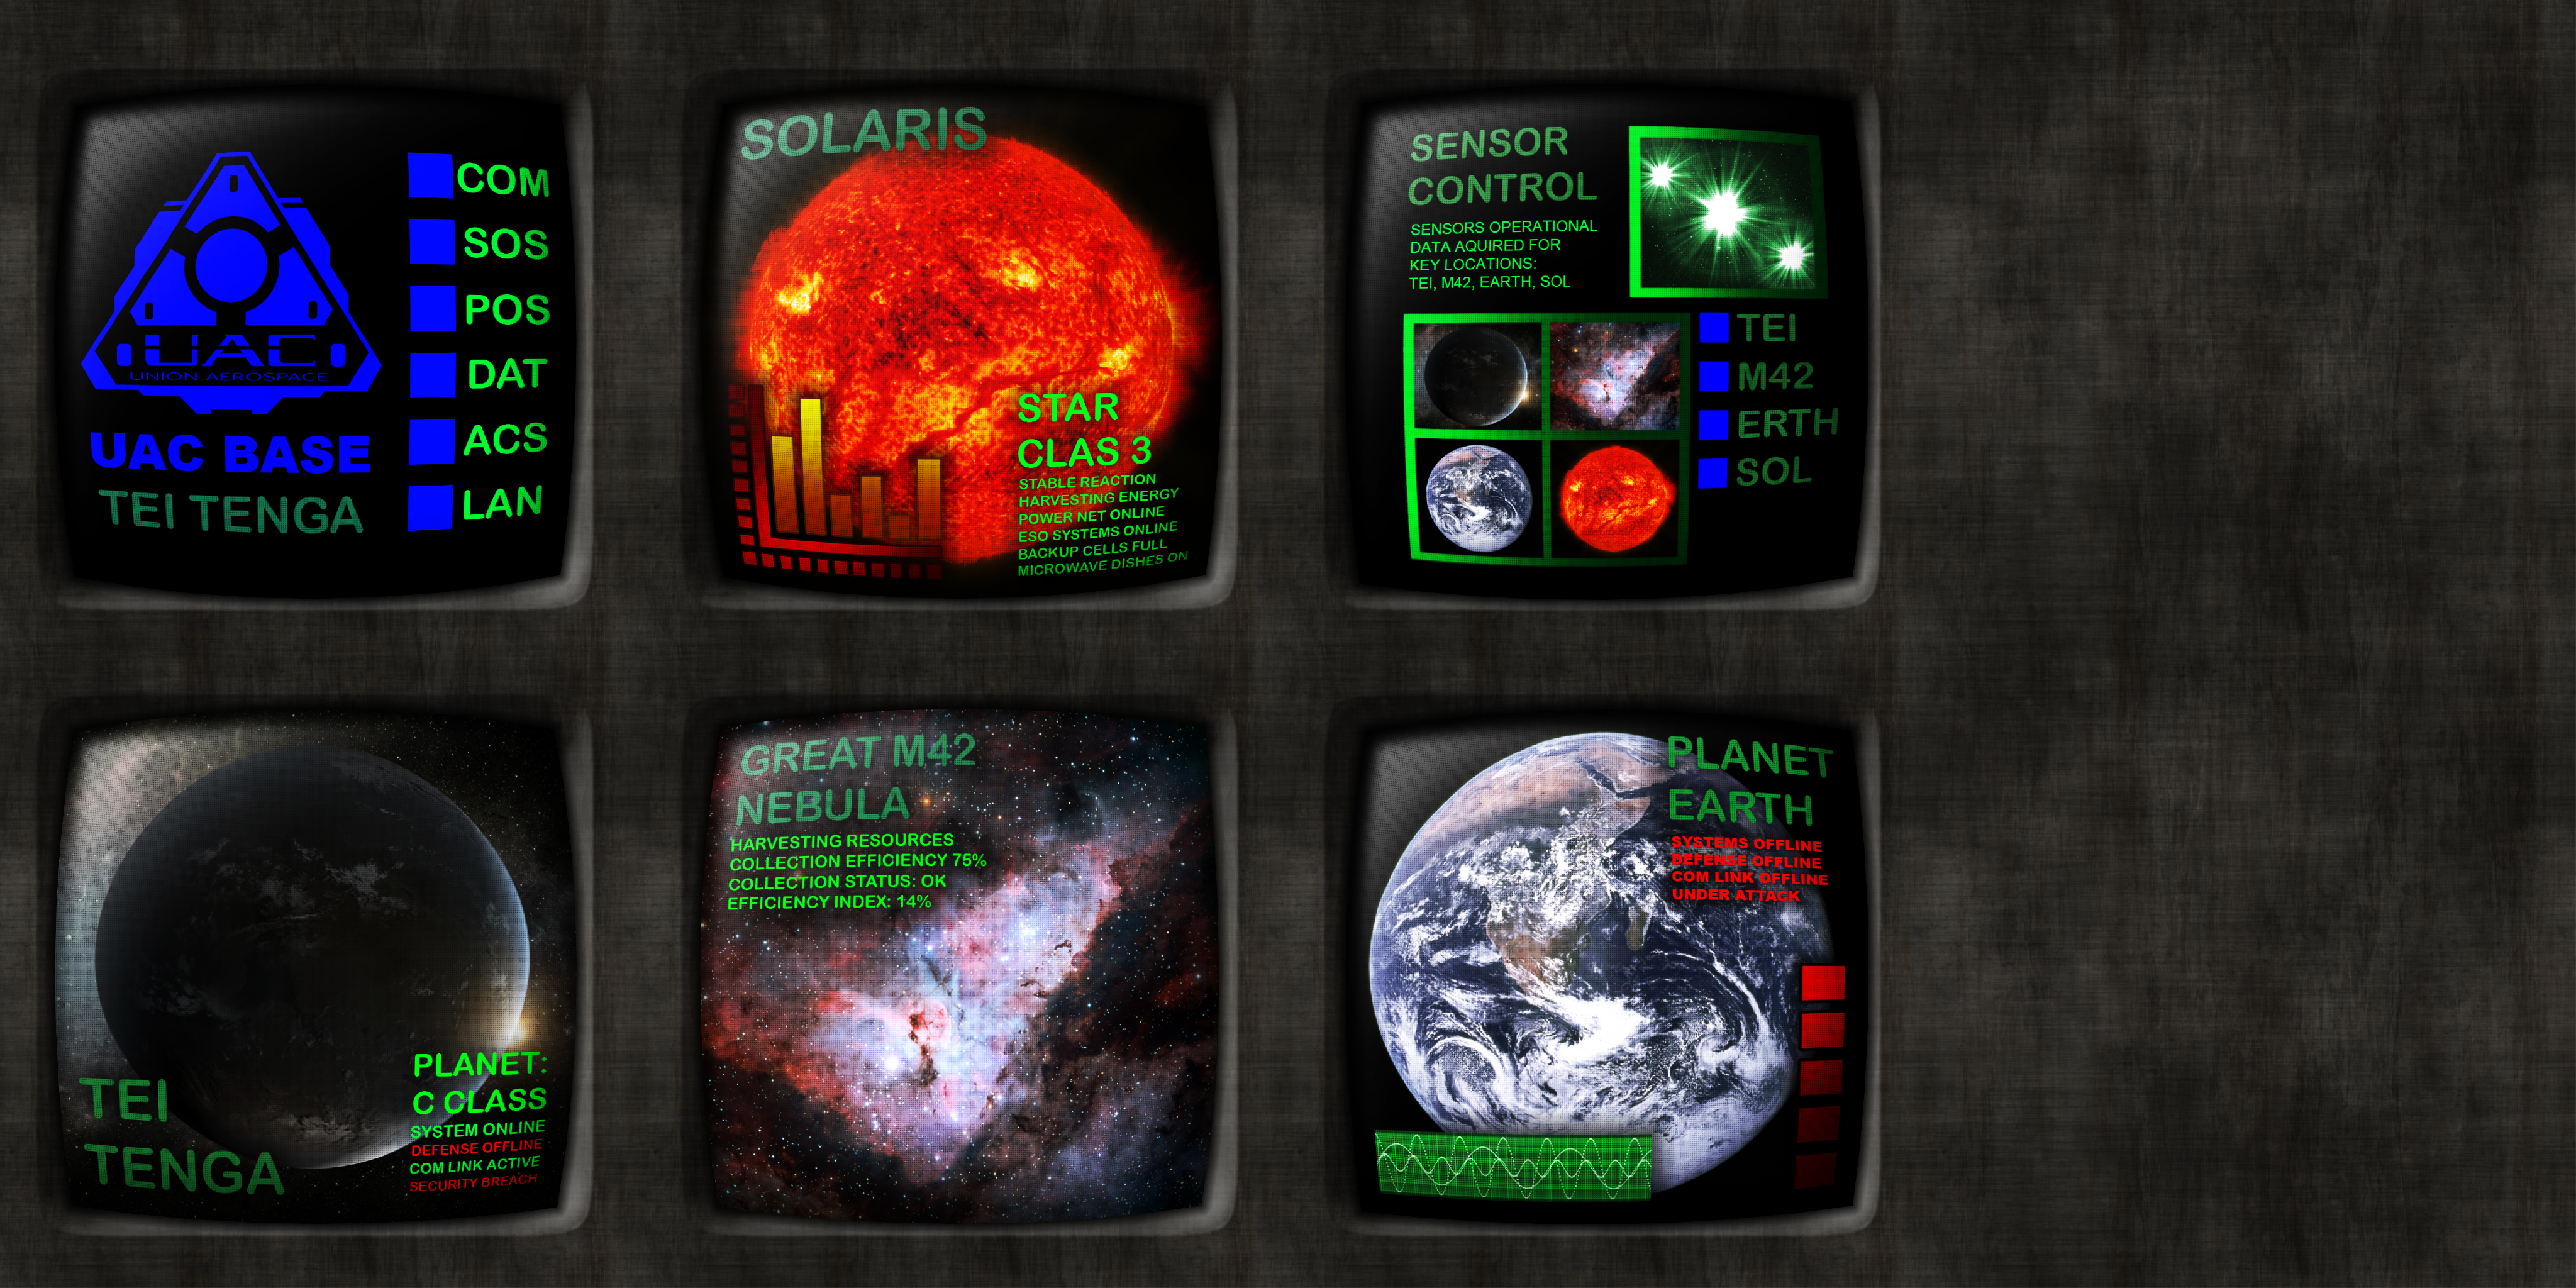 tech_wall_w_planets_by_hoover1979-dbw37ru.png